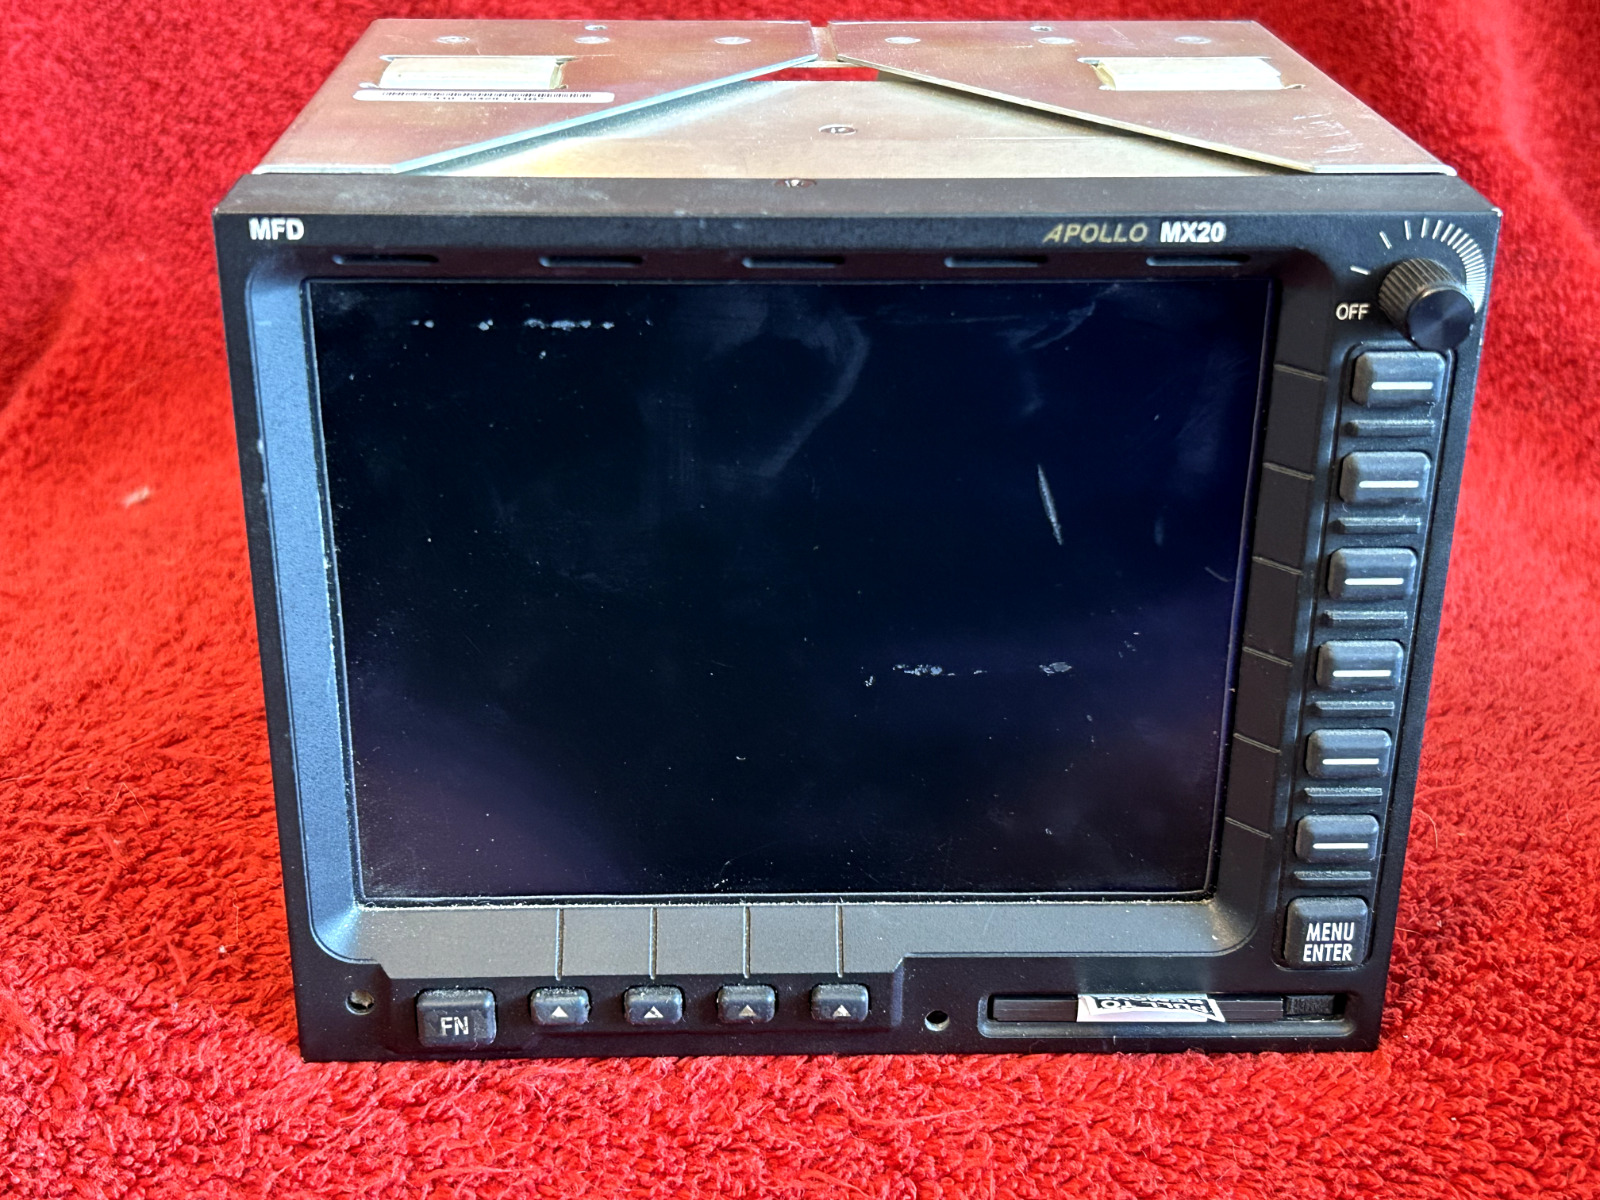 GARMIN MX 20 MULTI FUNCTION DISPLAY P/N 430-0271-600 WITH TRAY AND CONNECTORS